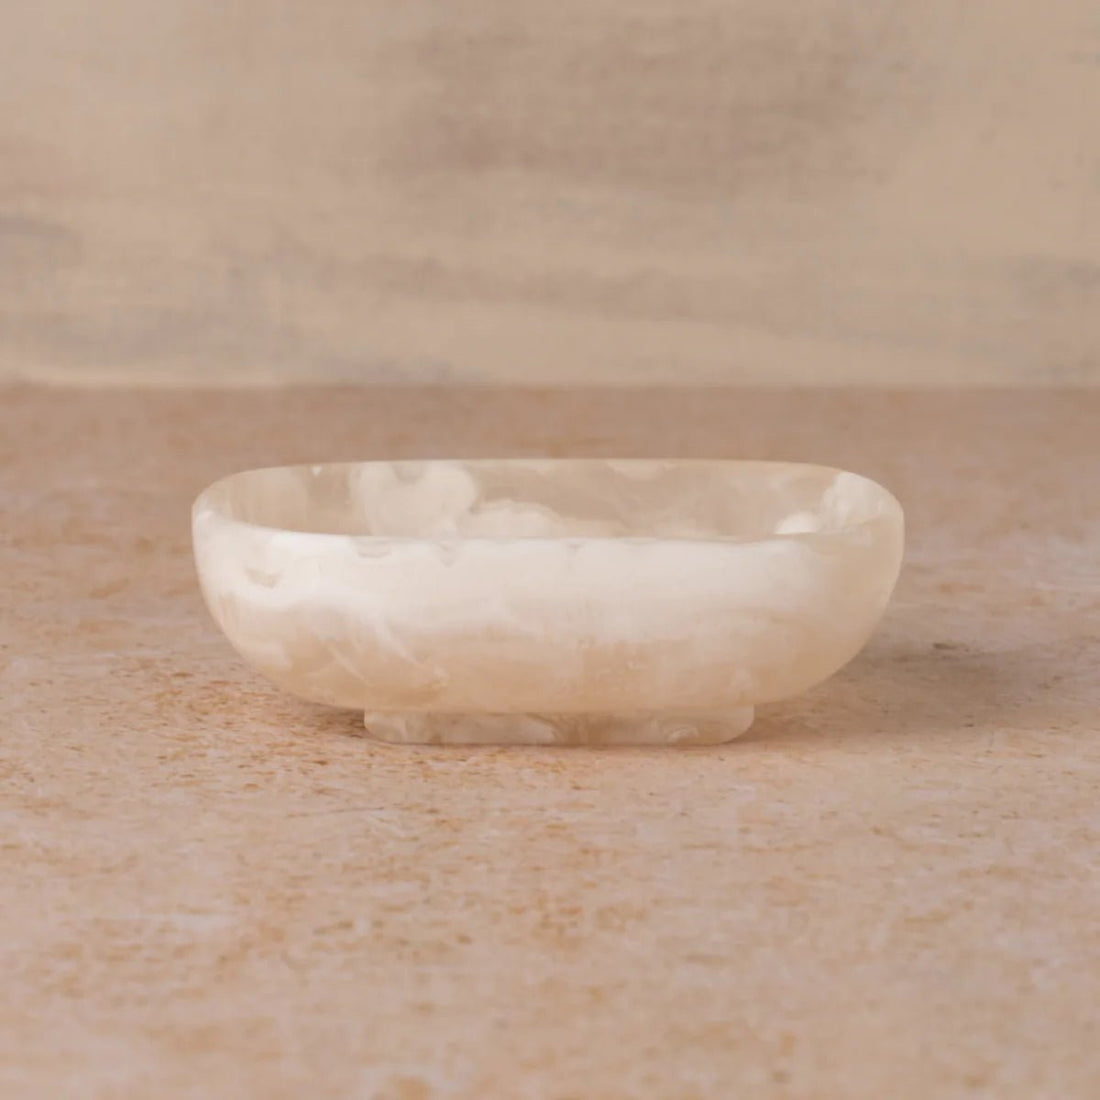 Flow Resin Soap Dish - Peach Blush - The Flower Crate